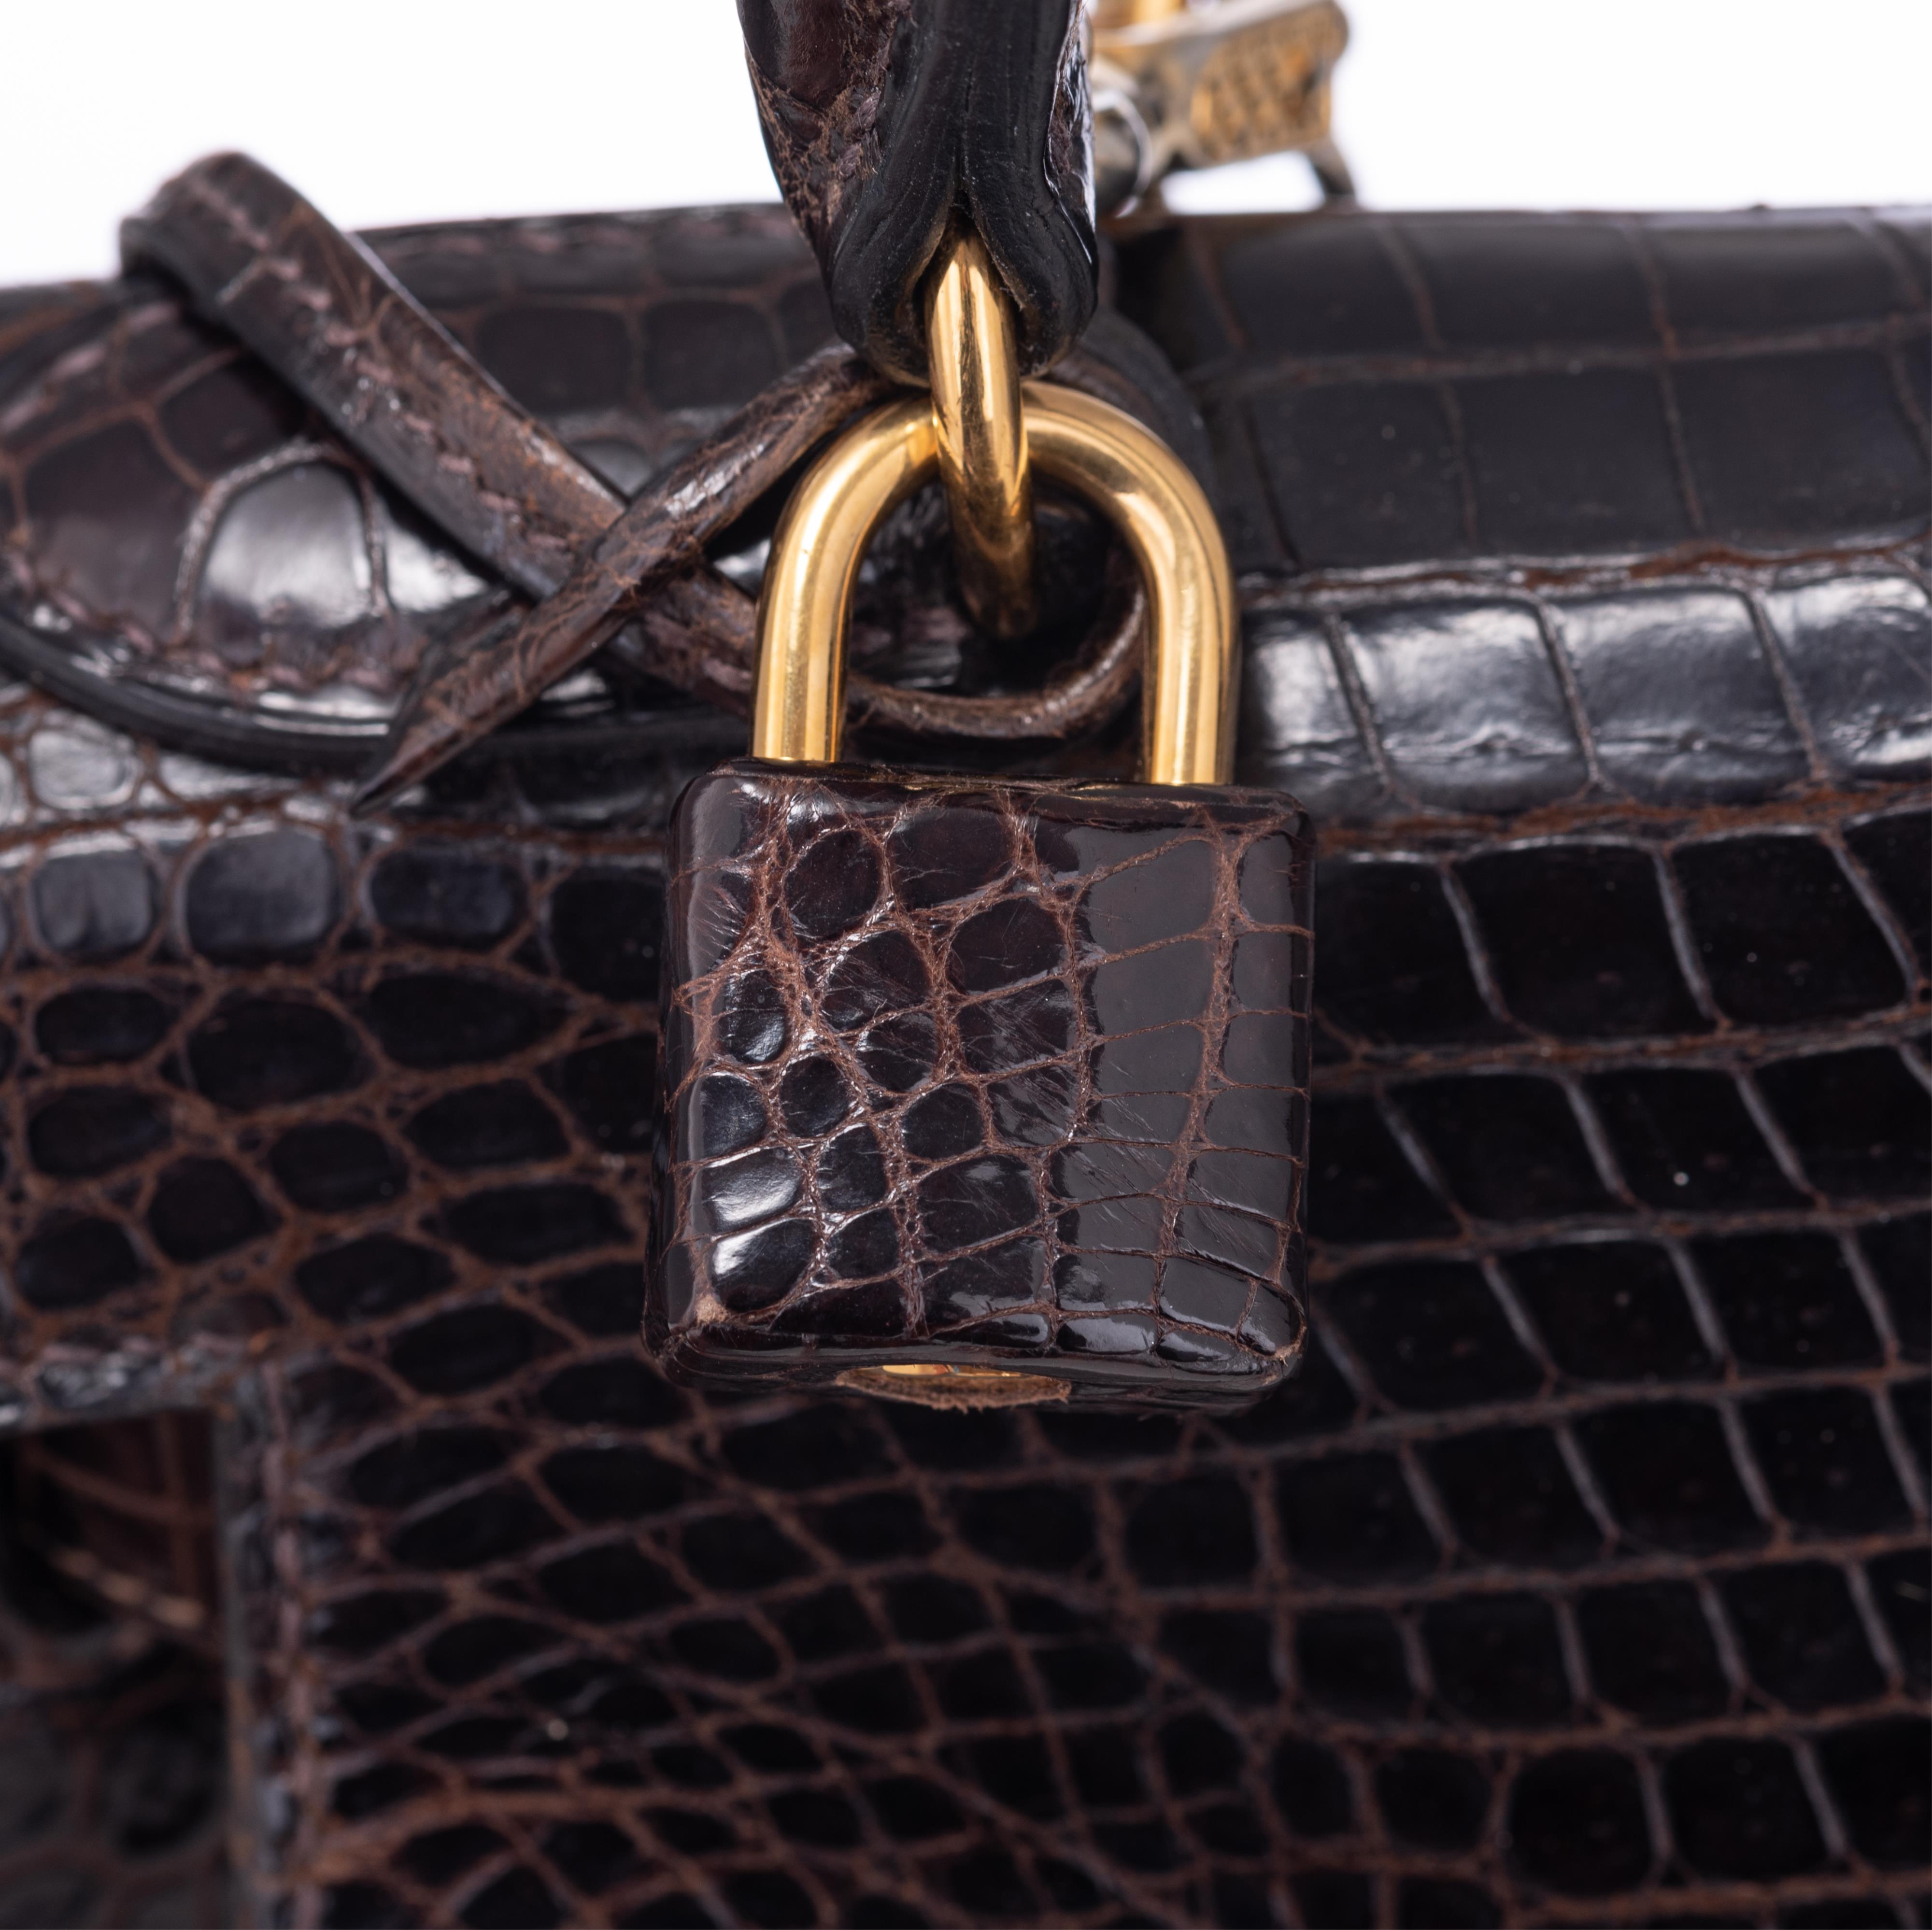 HERMÈS, Kelly Sellier 29 bag, Brown crocodile leather, with gilt metal hardware, Vintage about 1975 - Image 9 of 15